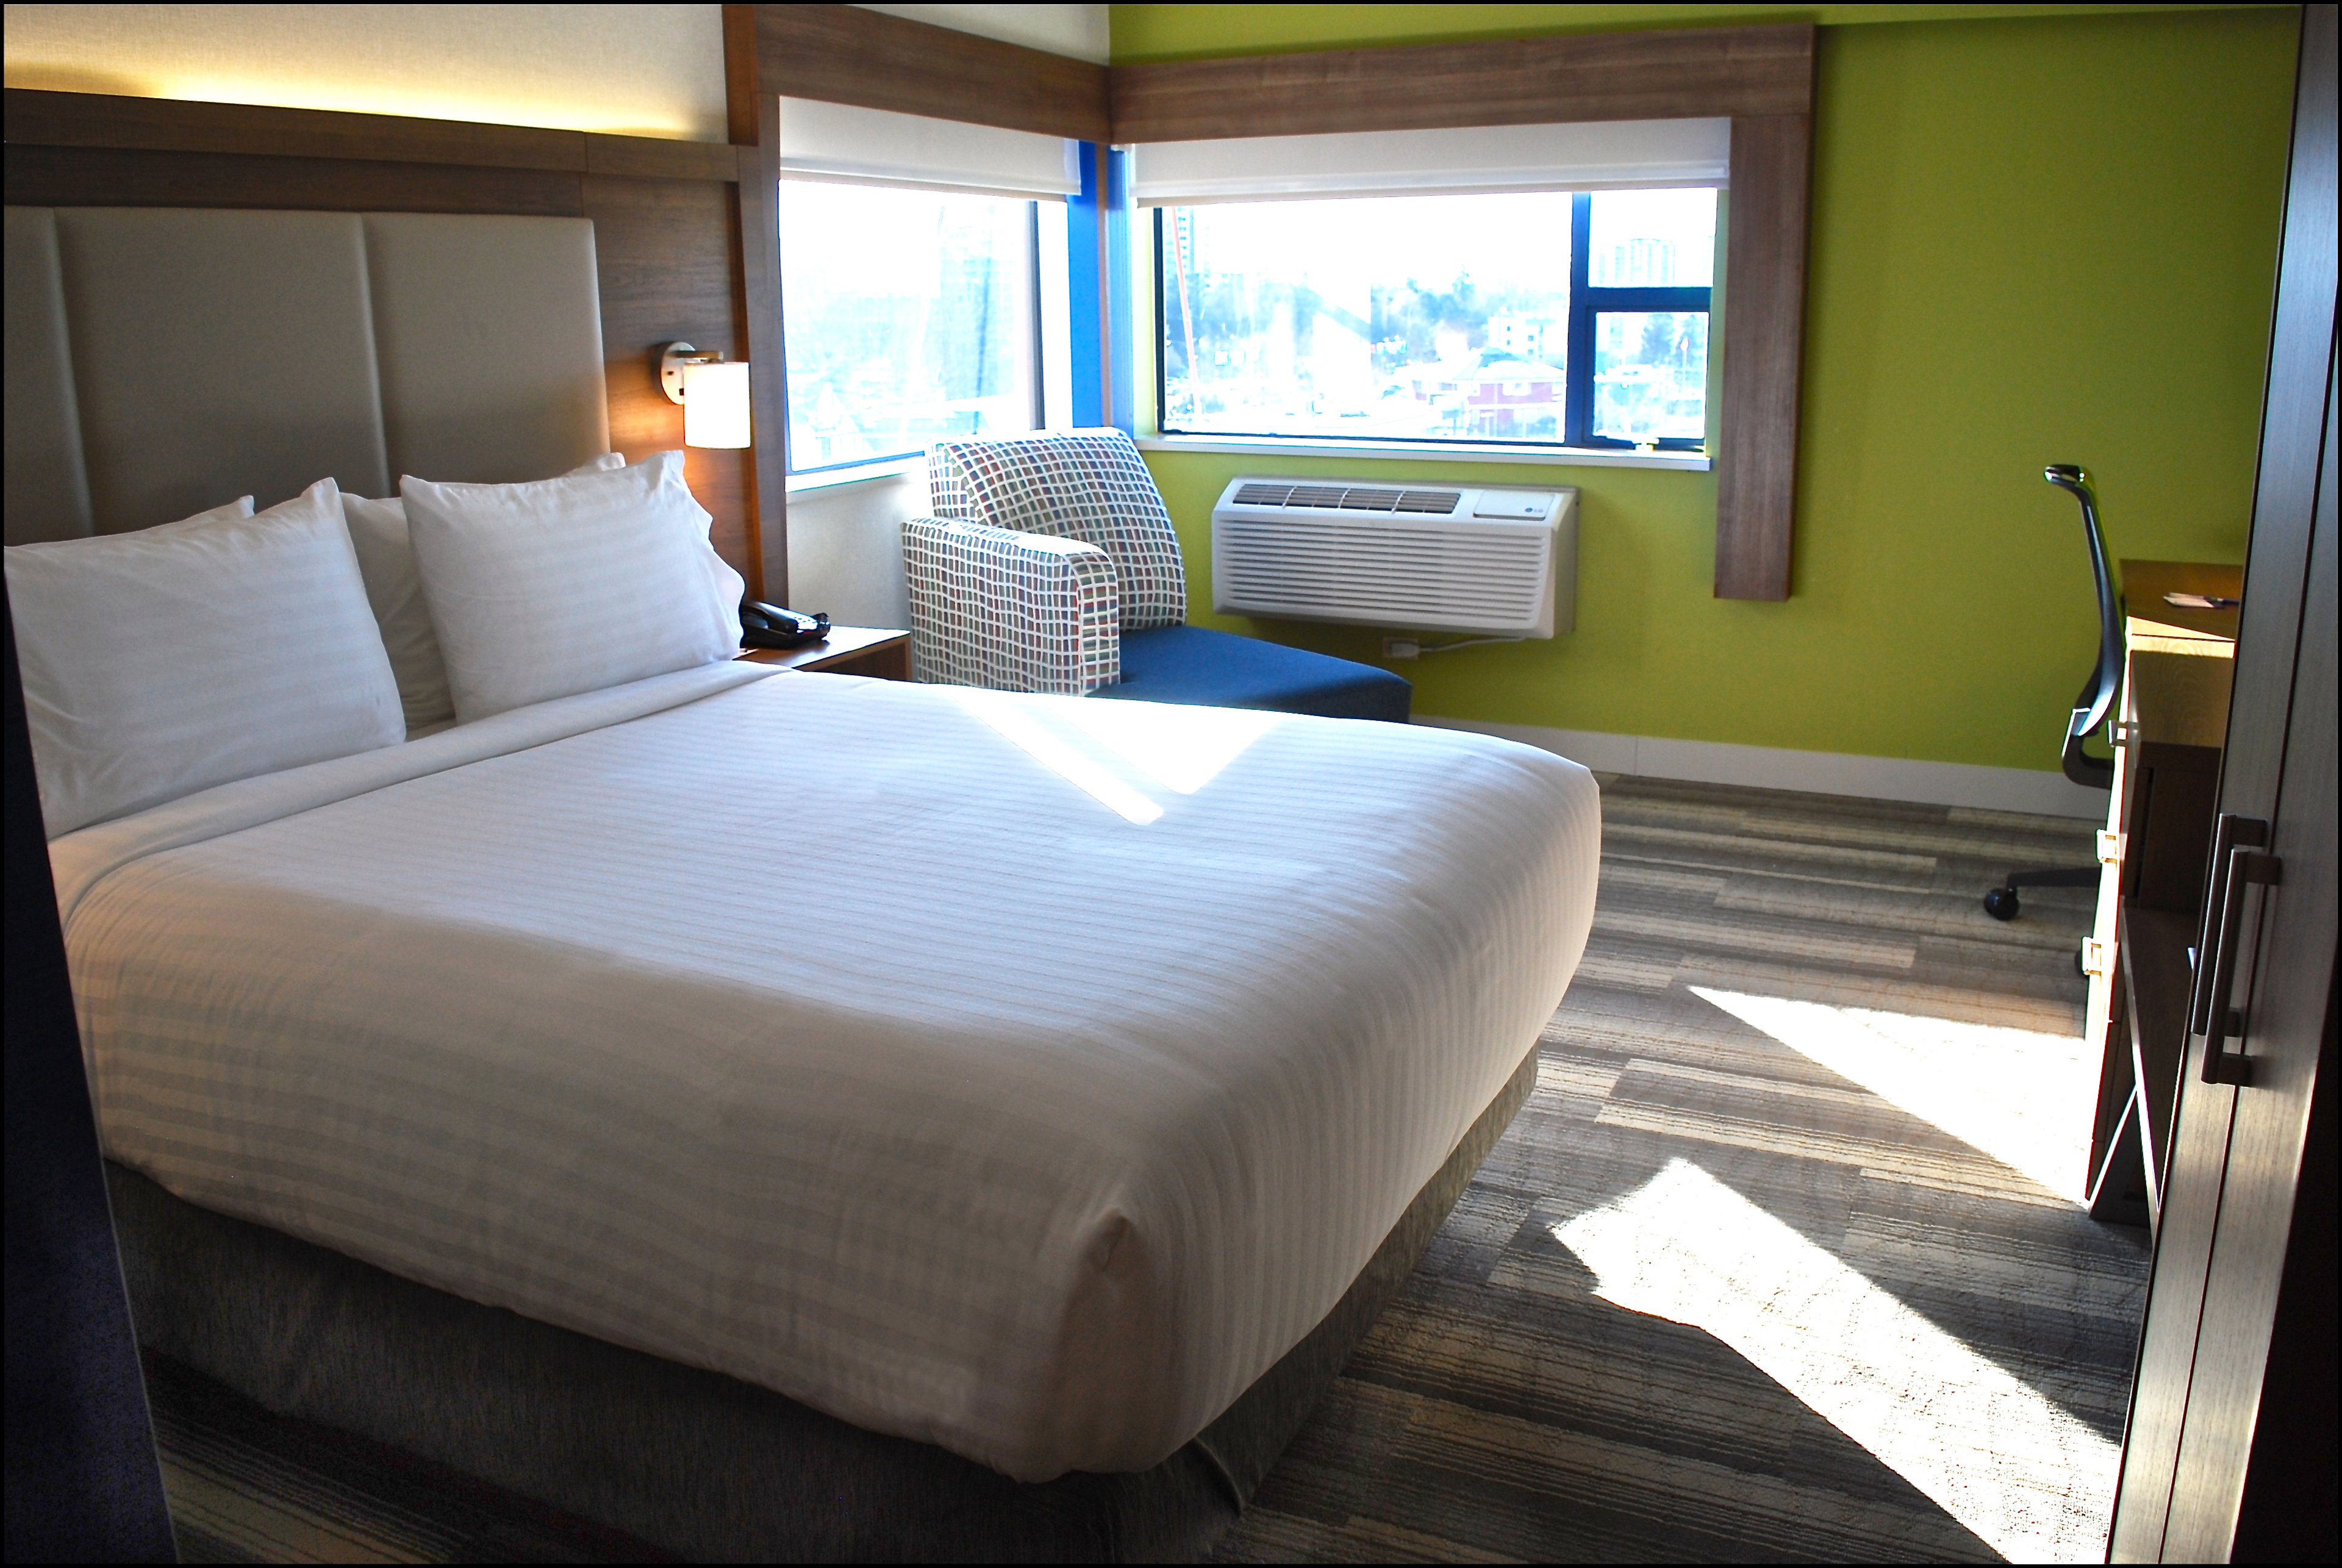 For extra space, book our queen bed guest room